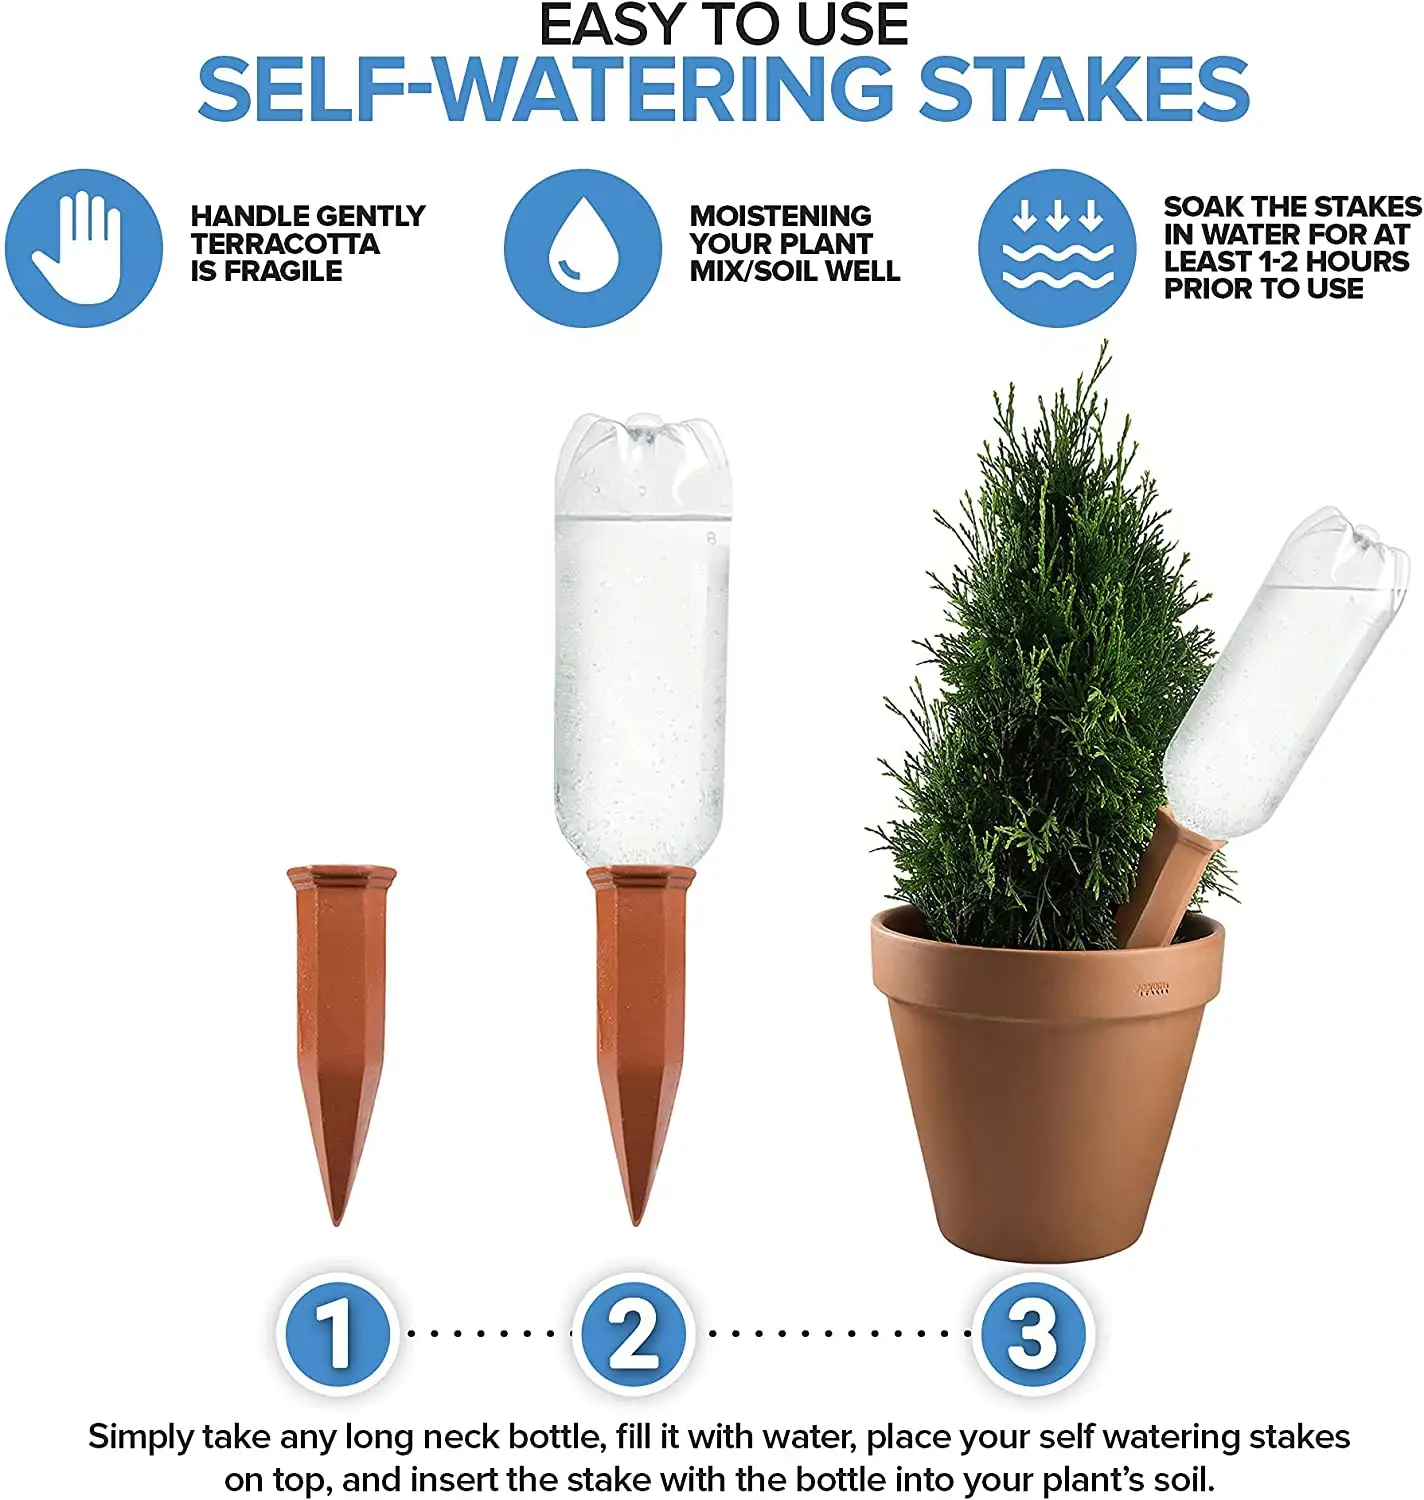 Self-Watering Stakes for Vacation Outdoor Indoor Plant Watering Device Carrot Shape Terra-Cotta Plant Waterer for Wine Beer Bottle 4 Packs Plant Self Watering Spikes 